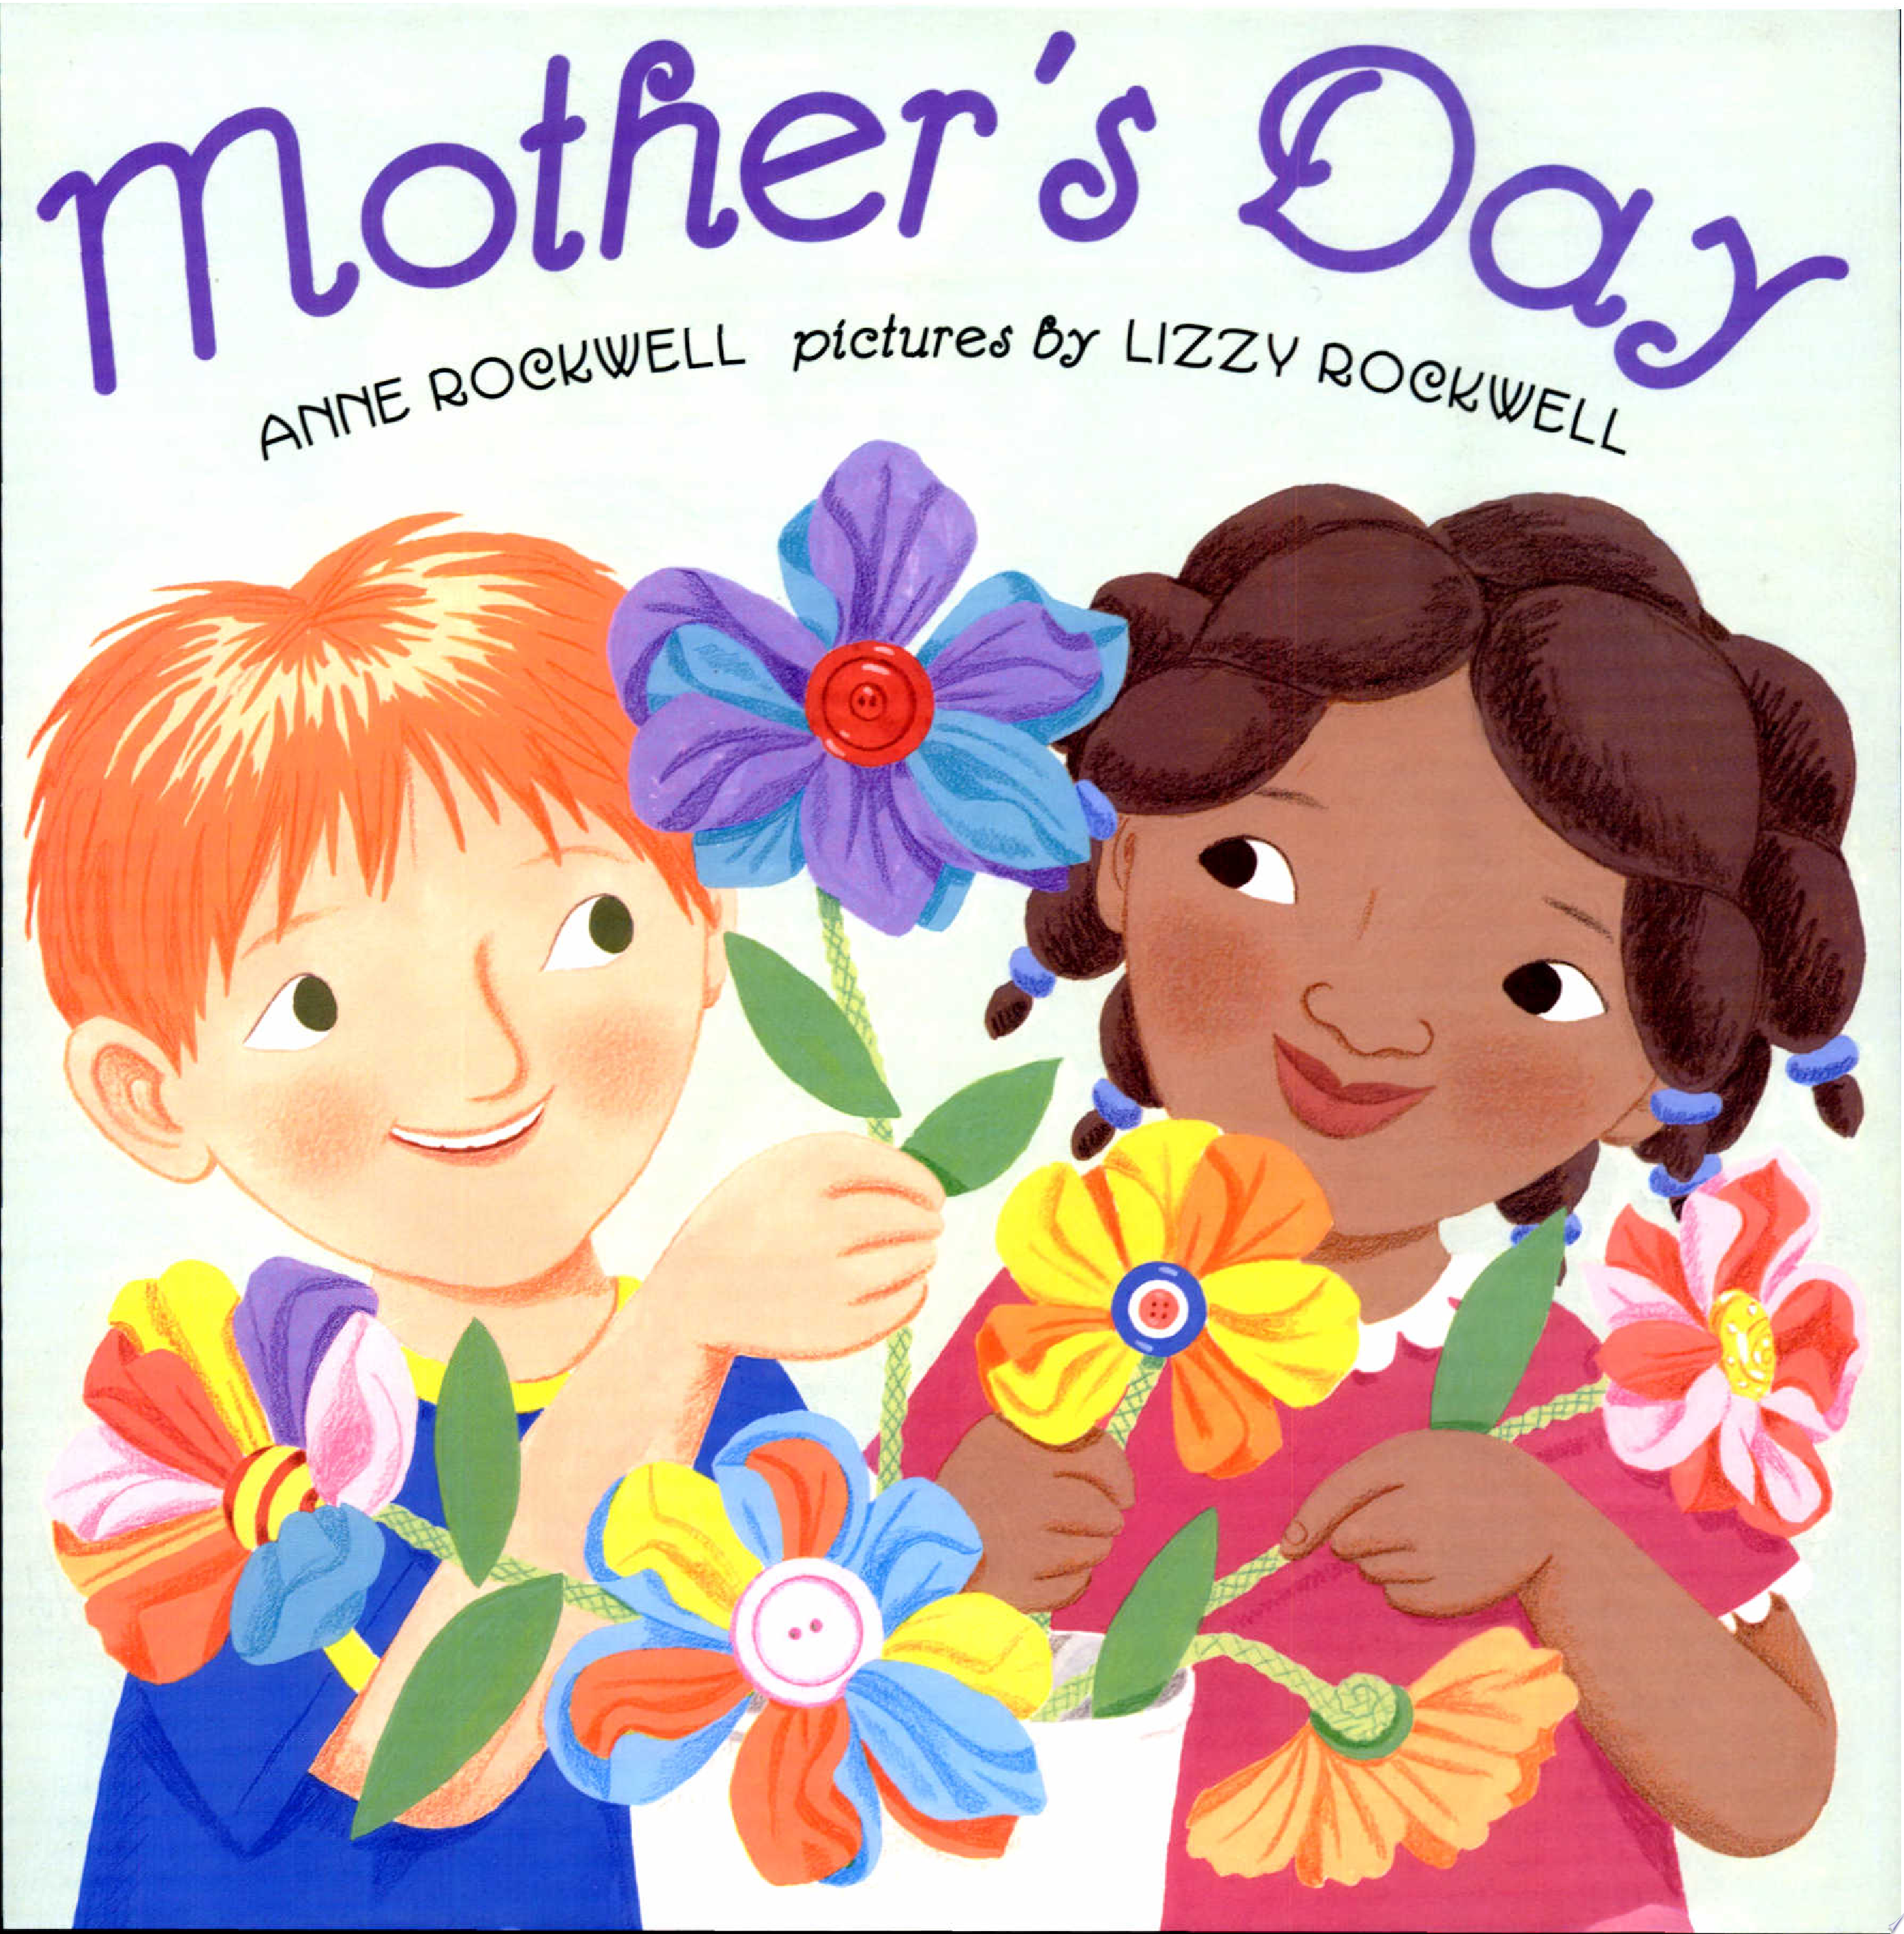 Image for "Mother's Day"